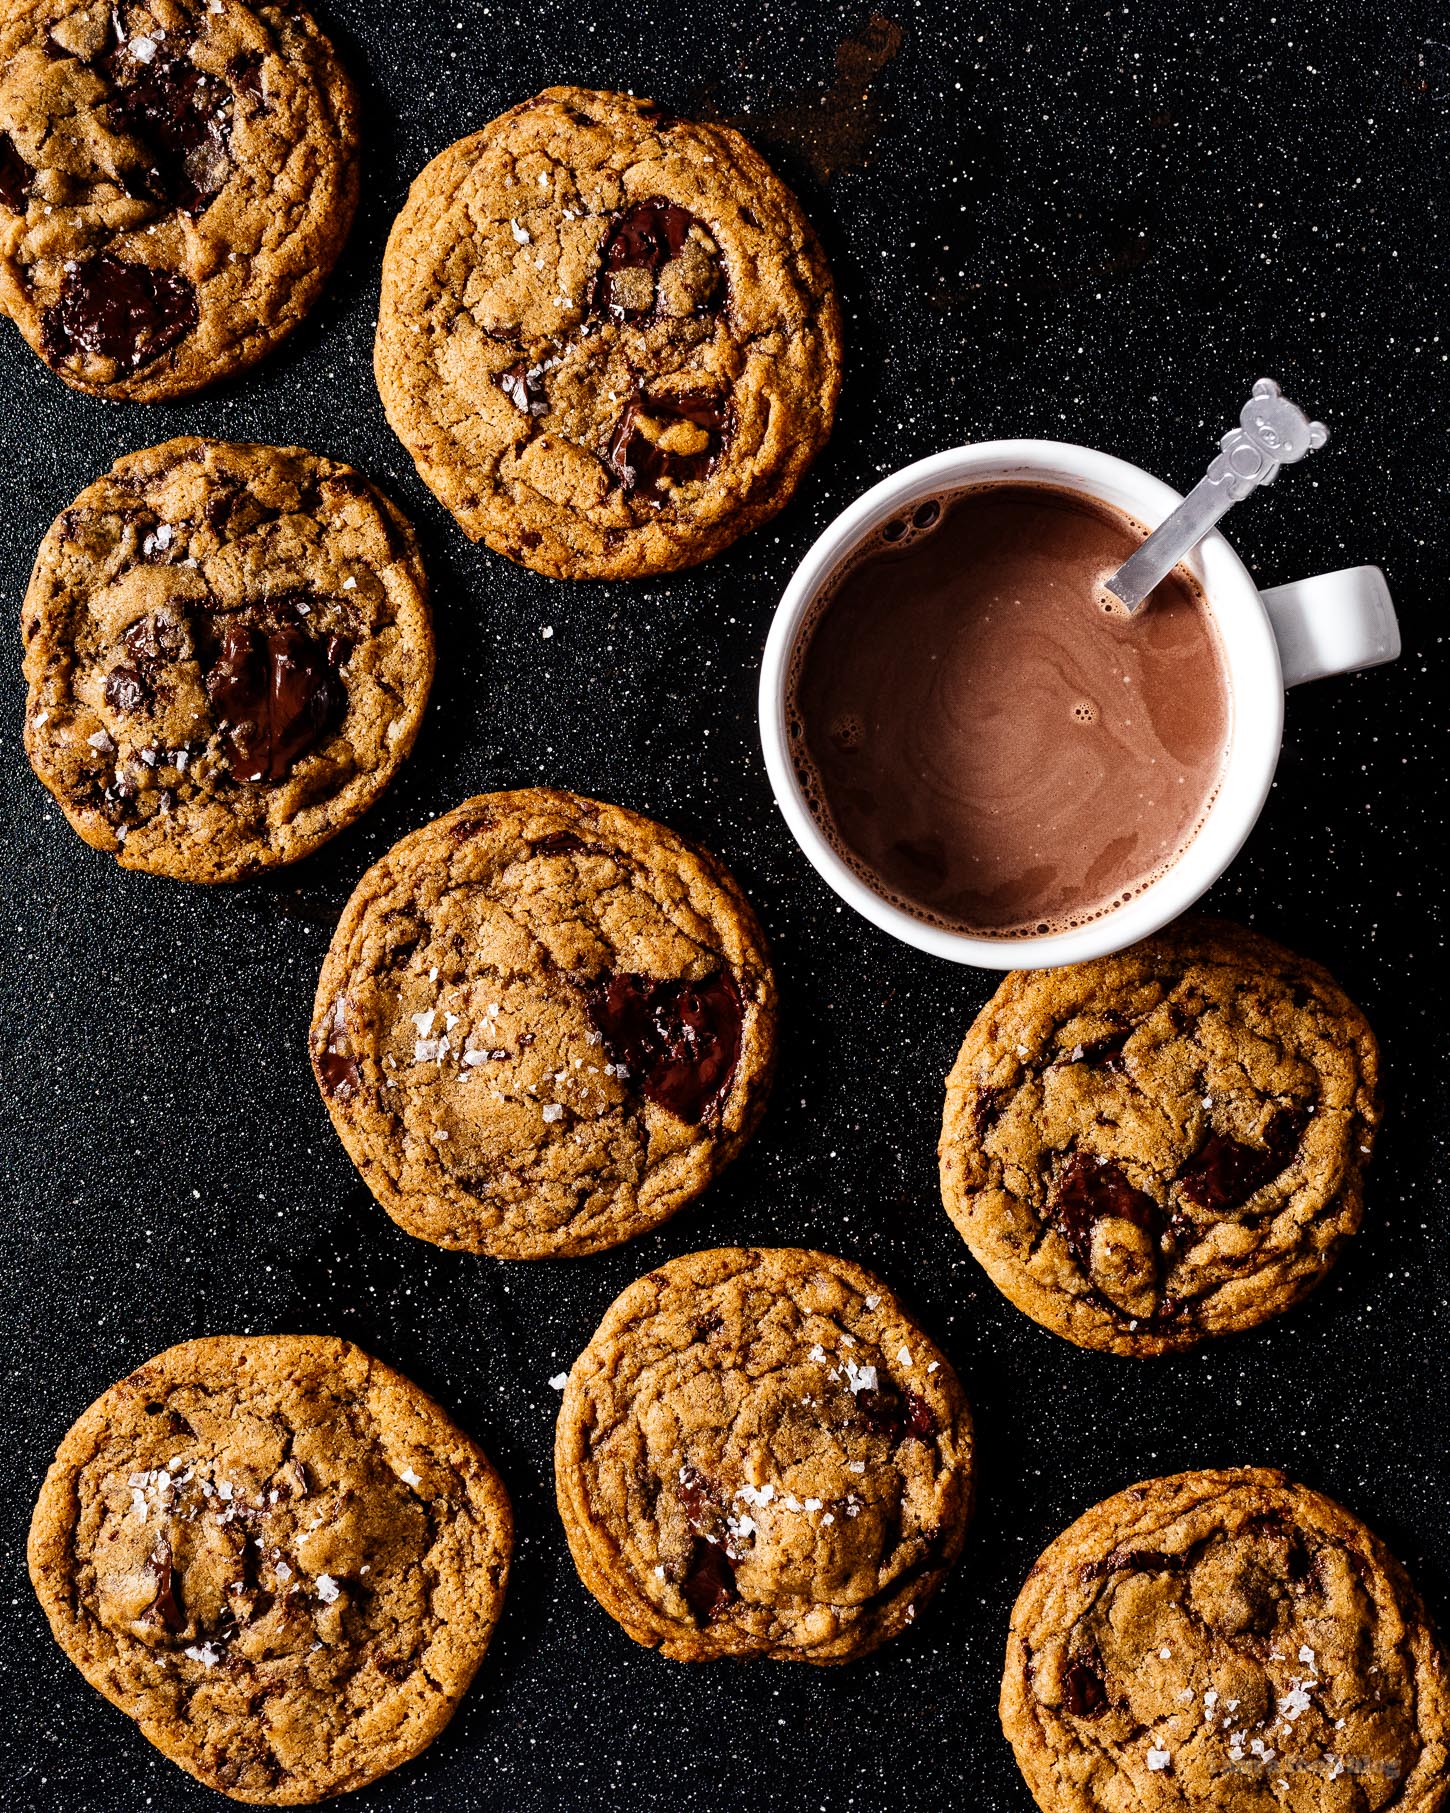 Discover ALL the crispy edges, soft and gooey chocolate, and brown sugar goodness in this vegan chocolate chip cookies recipe. #vegan #chocolatechip #chocolate #chocolatechipcookie #recipe #recipes #veganrecipe